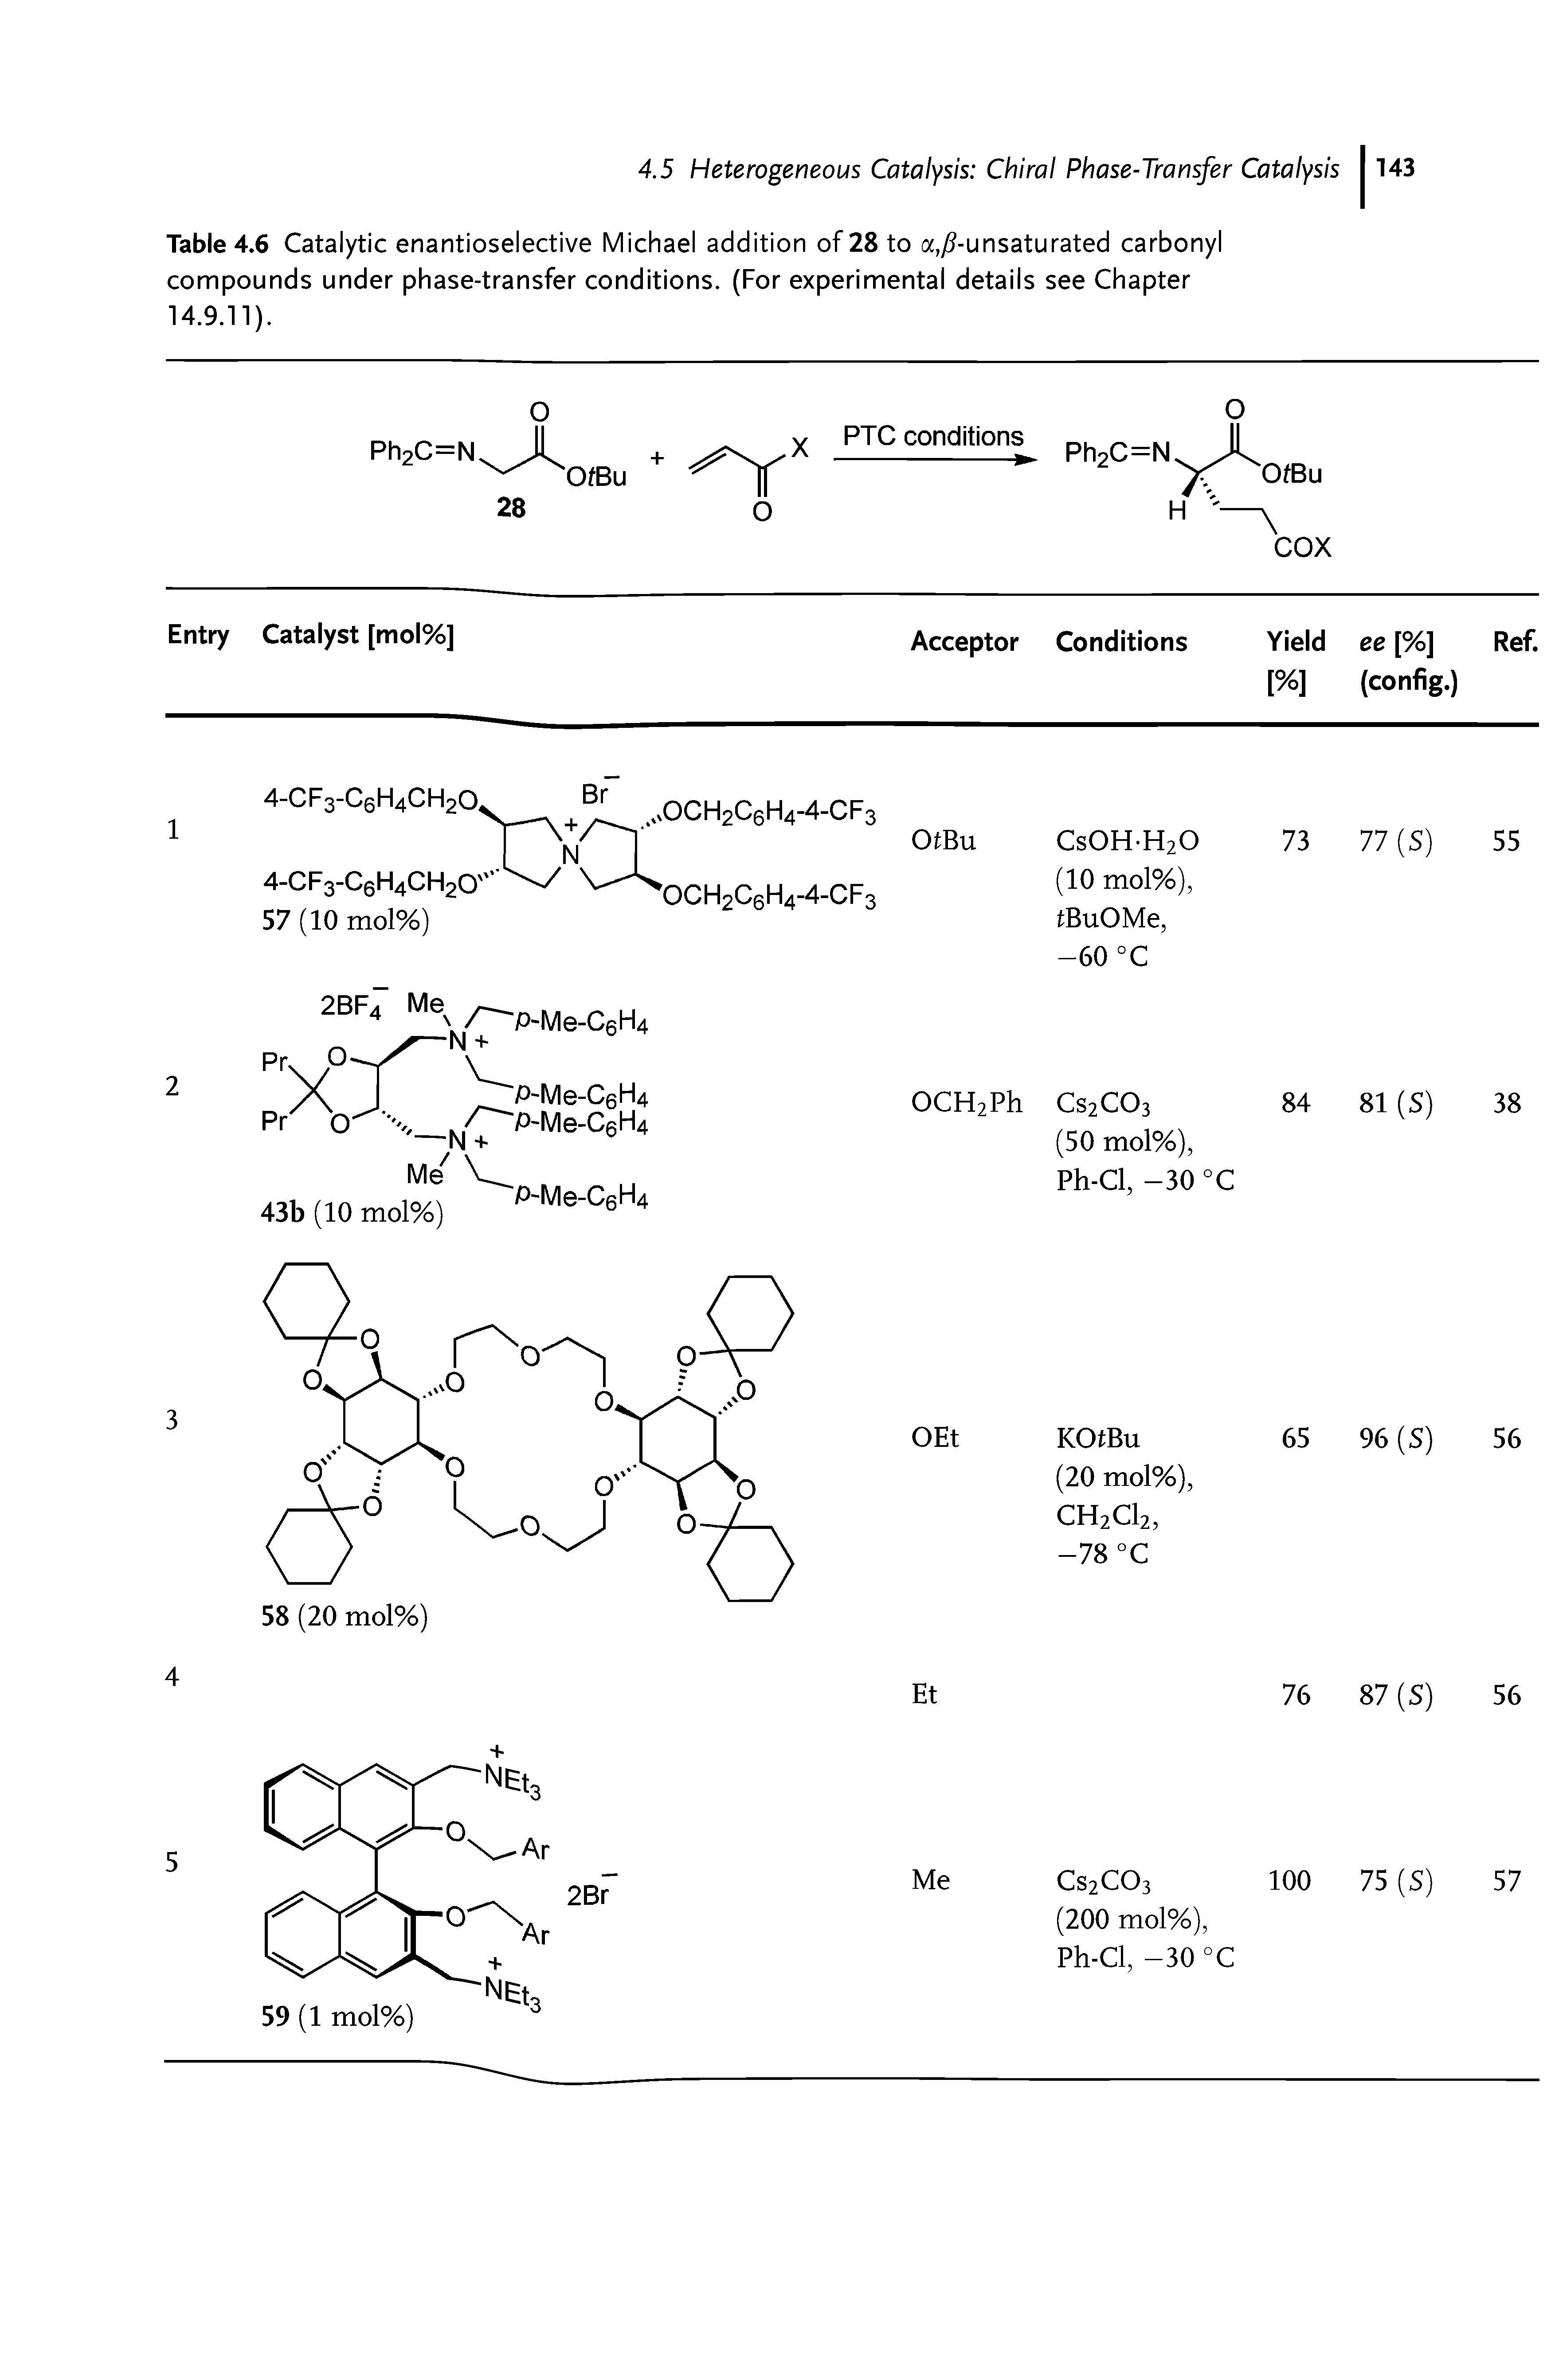 Table 4.6 Catalytic enantioselective Michael addition of 28 to a,/ -unsaturated carbonyl compounds under phase-transfer conditions. (For experimental details see Chapter 14.9.11).